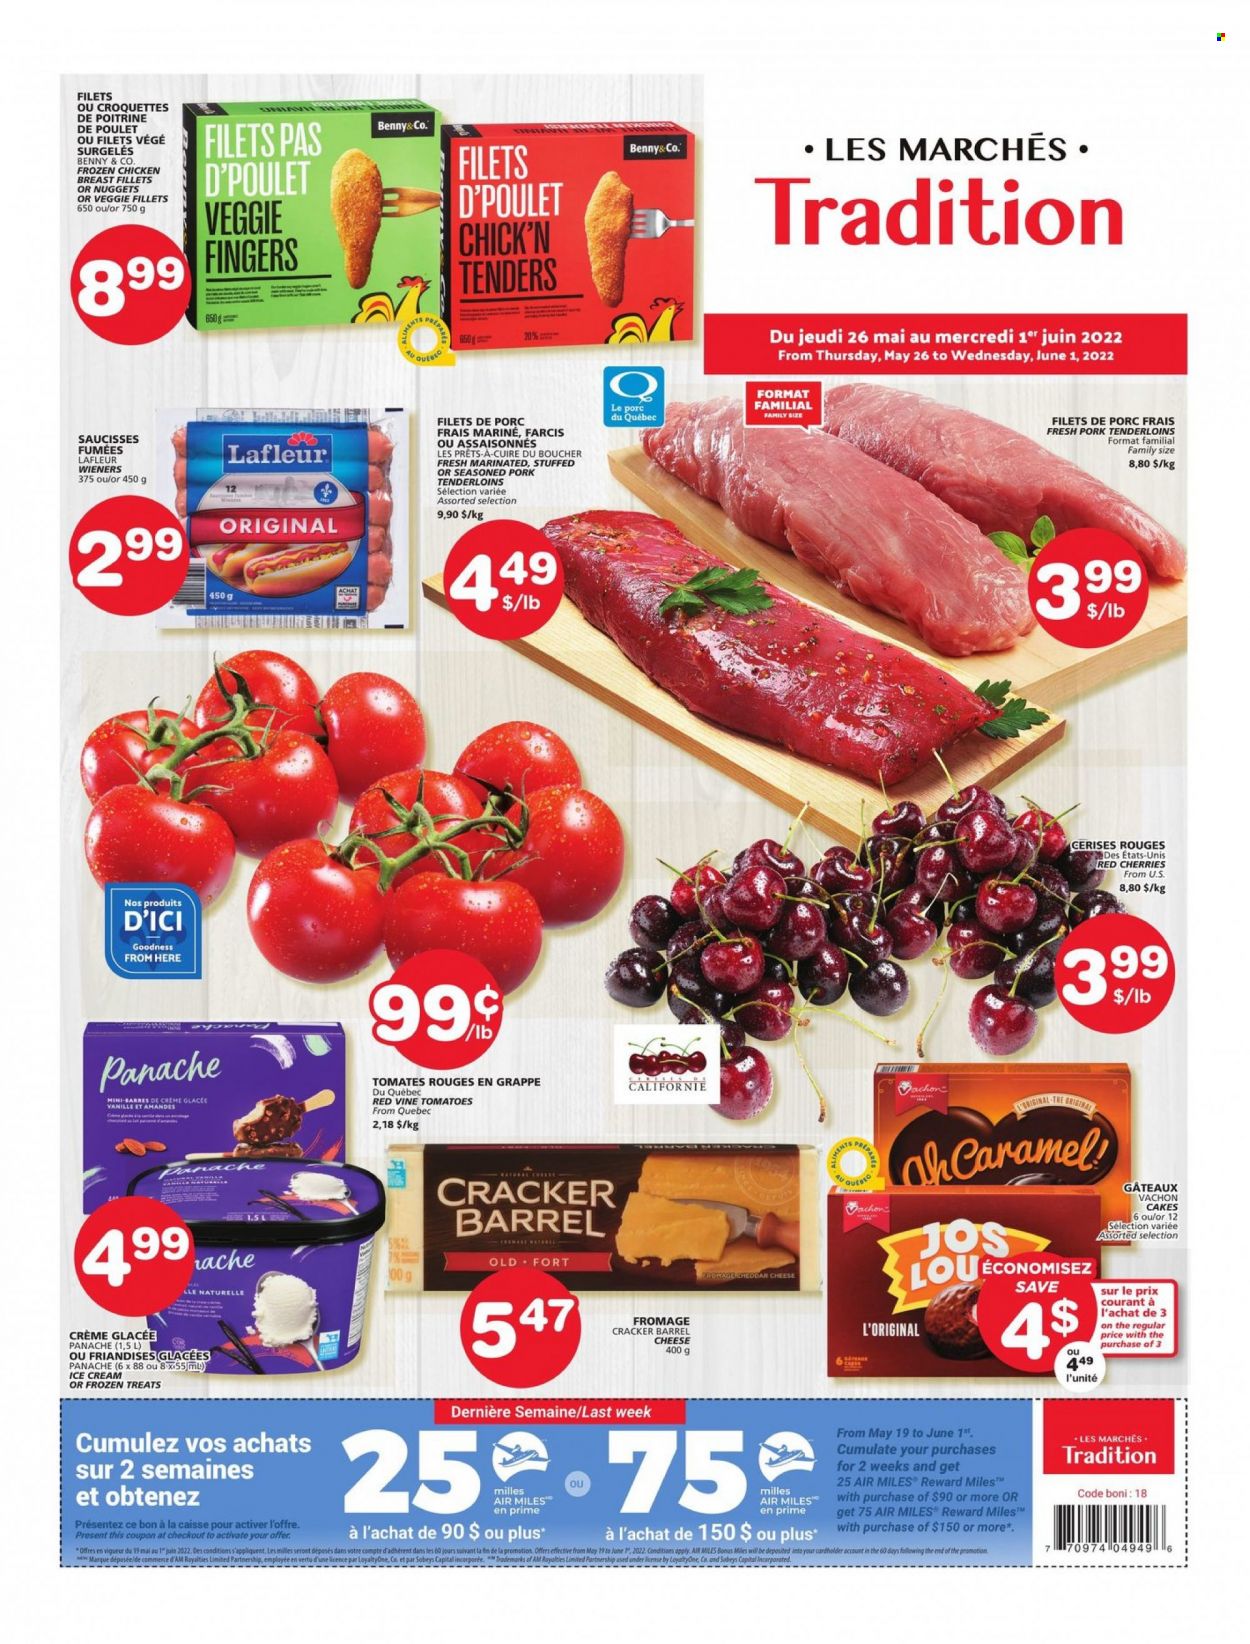 Les Marchés Tradition flyer  - May 26, 2022 - June 01, 2022.